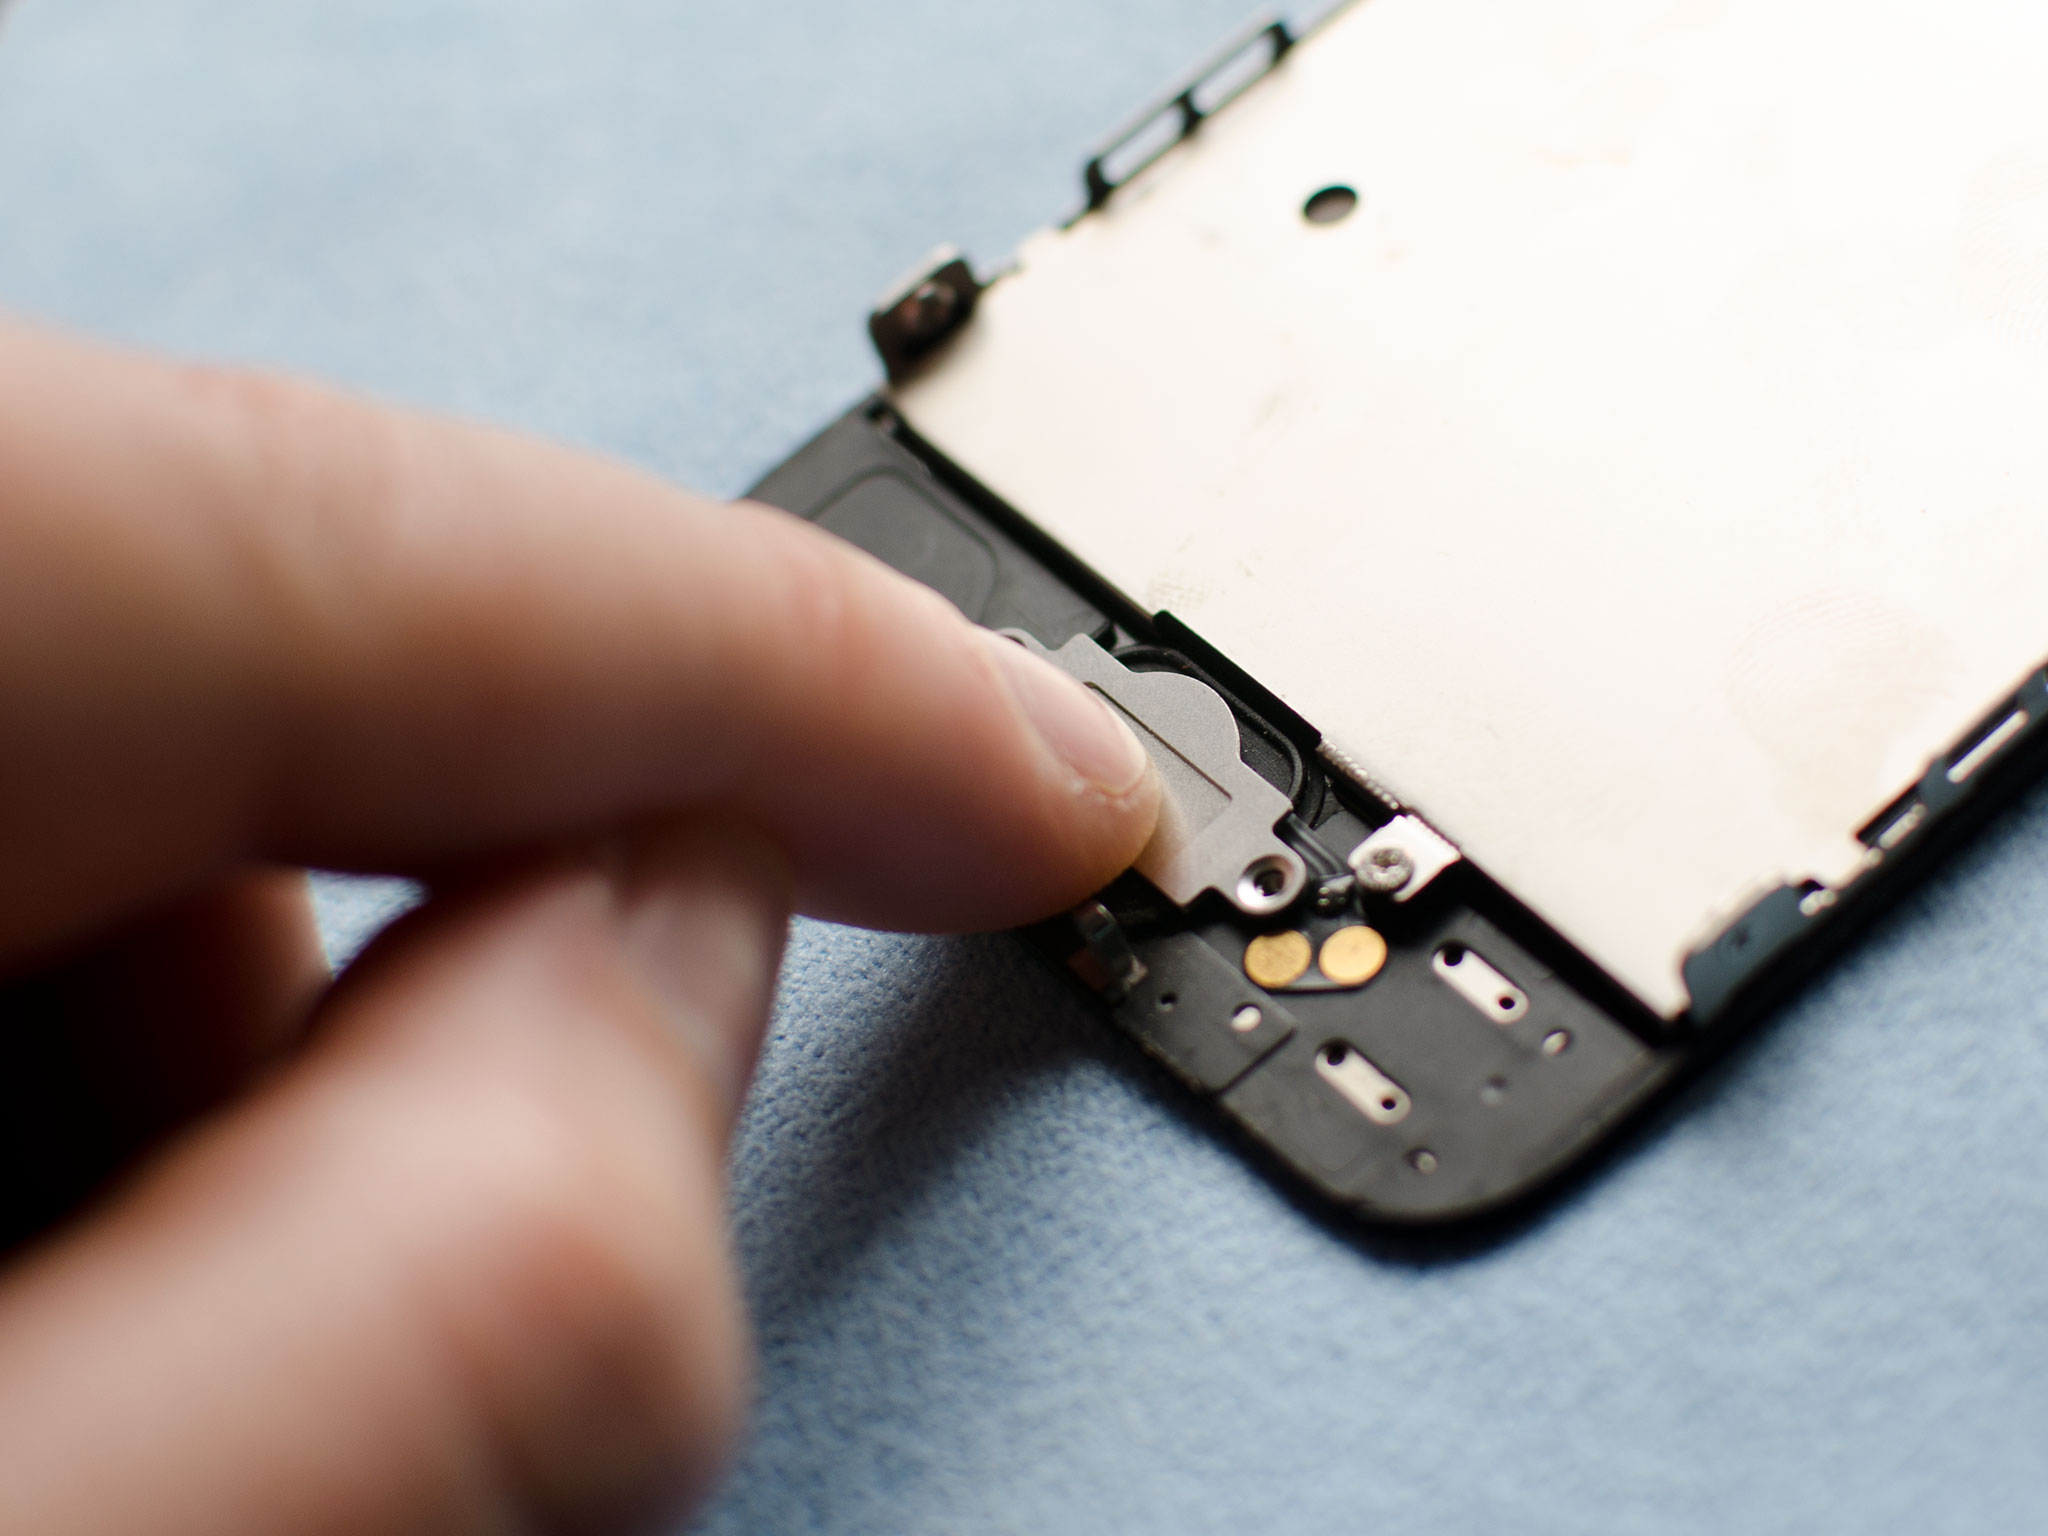 How to DIY replace the Home button on an iPhone 5